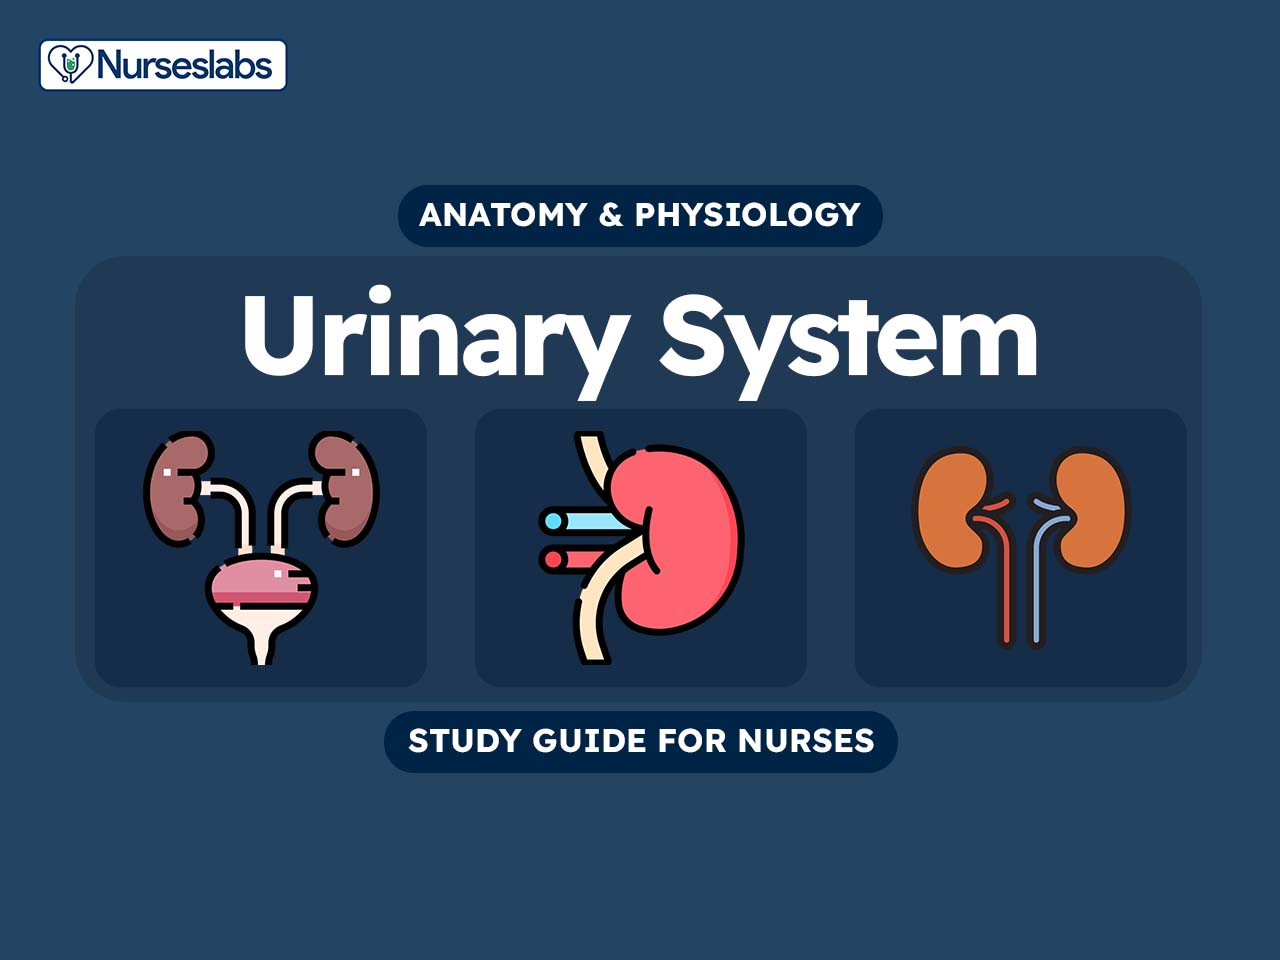 Urinary Leakage: Products and Treatment Options - Proxim